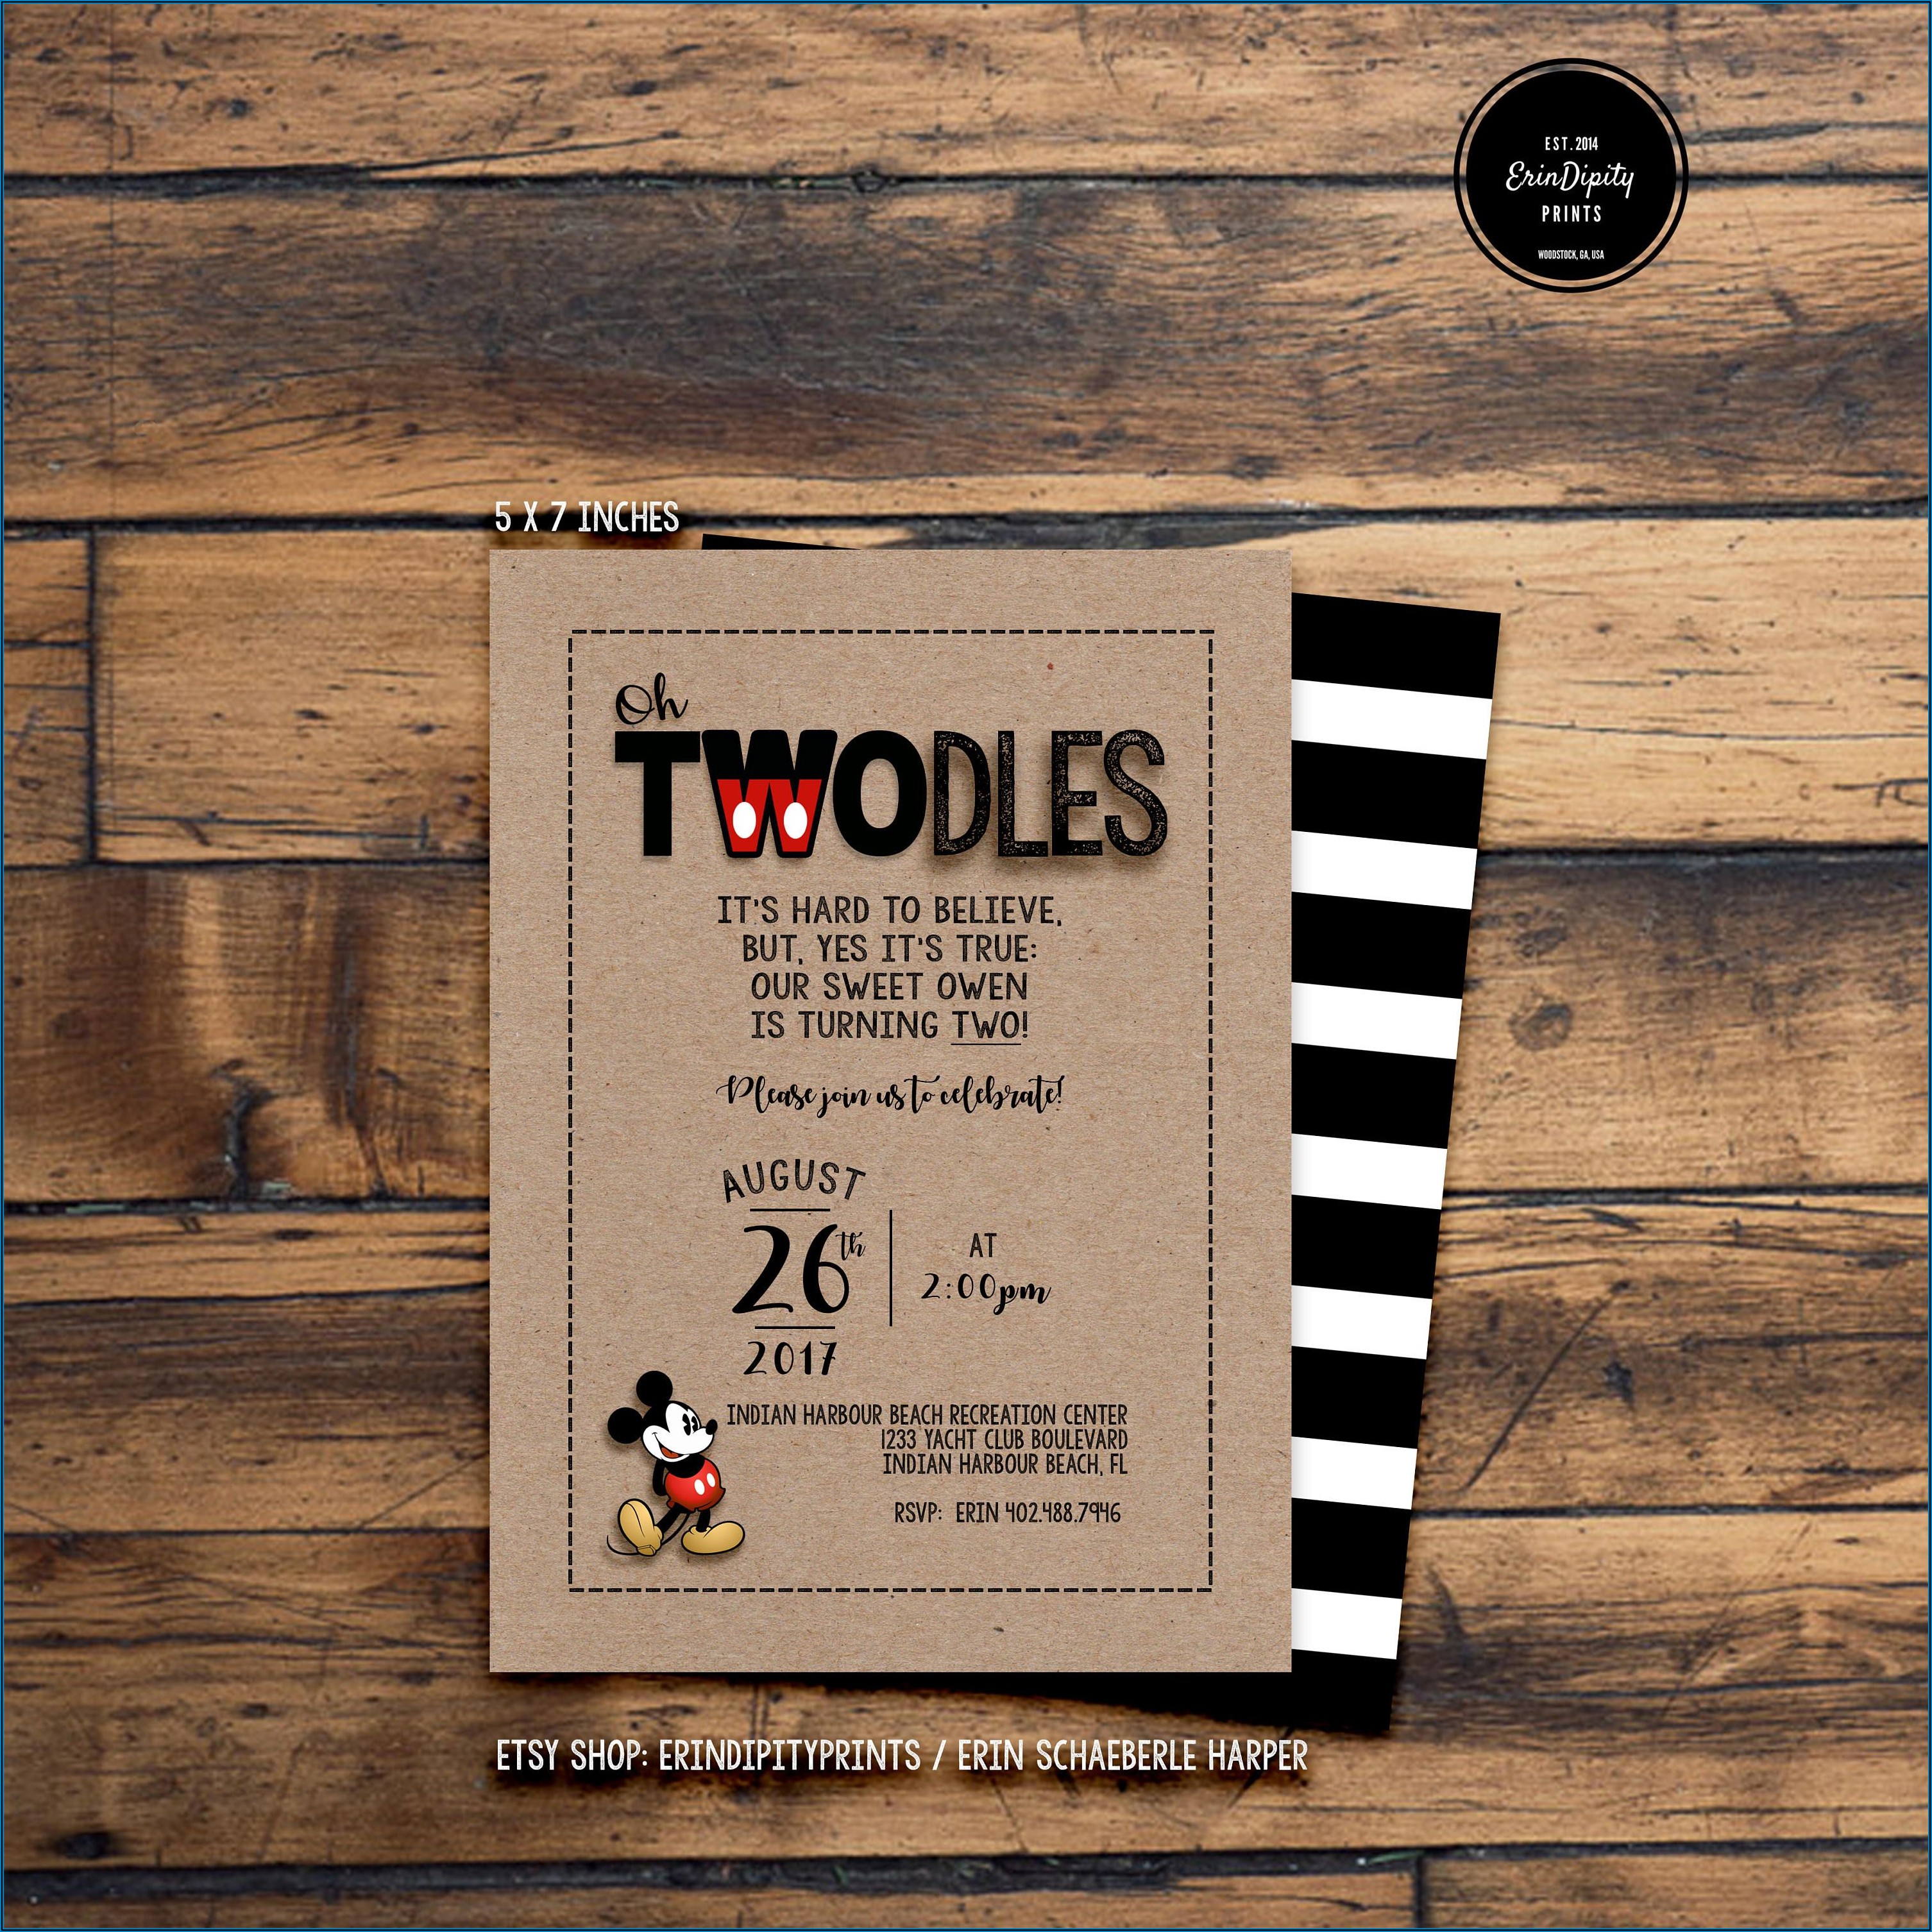 Oh Twodles Invitation Free